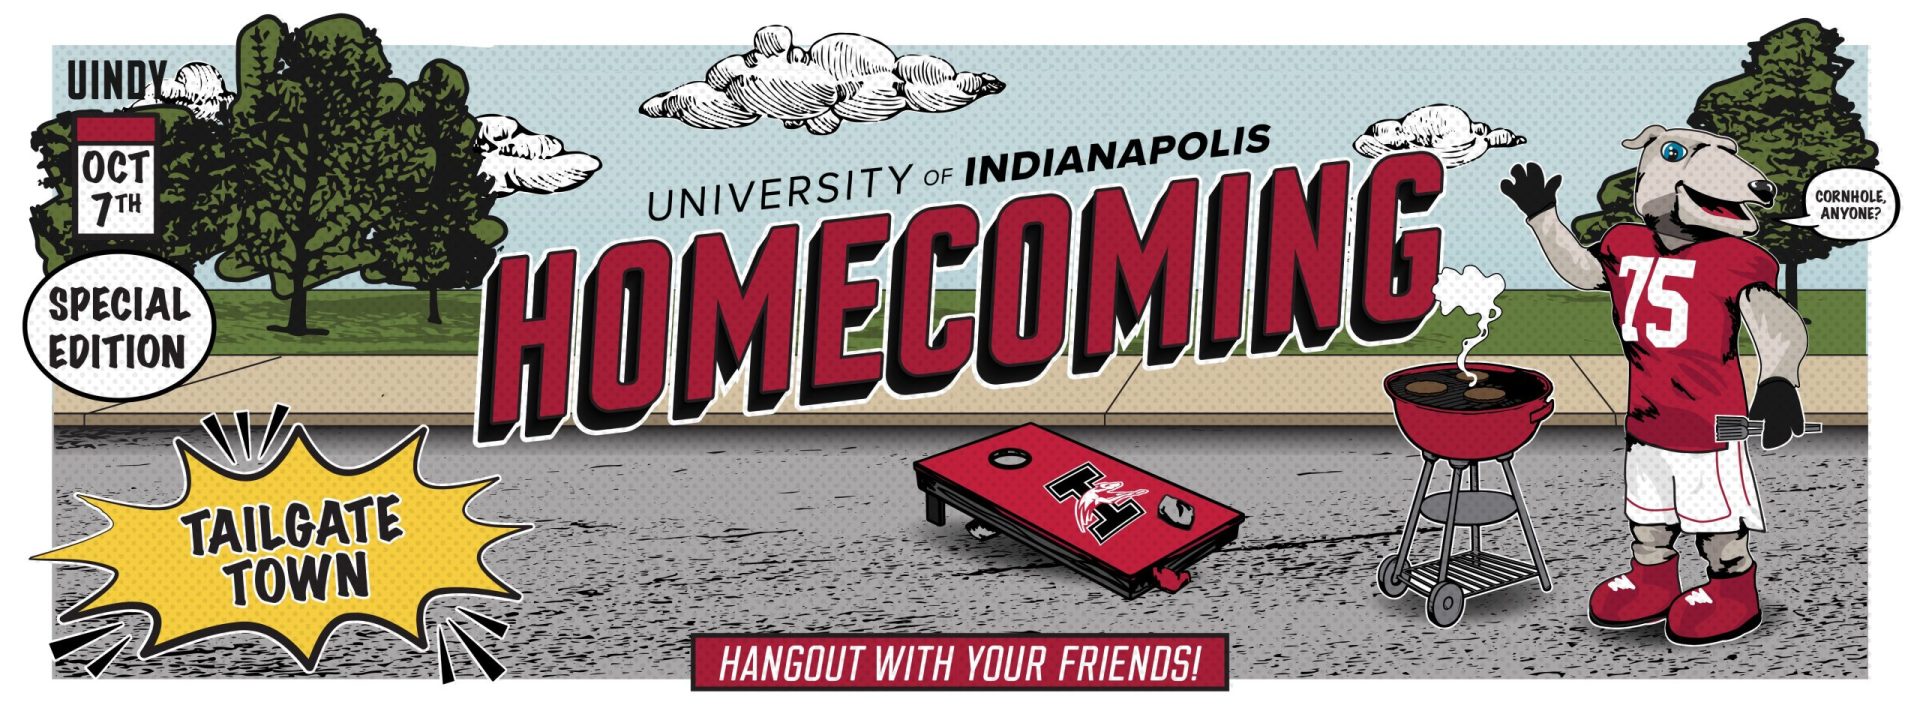 UIndy Homecoming 2023, October 6 and 7, tailgate town